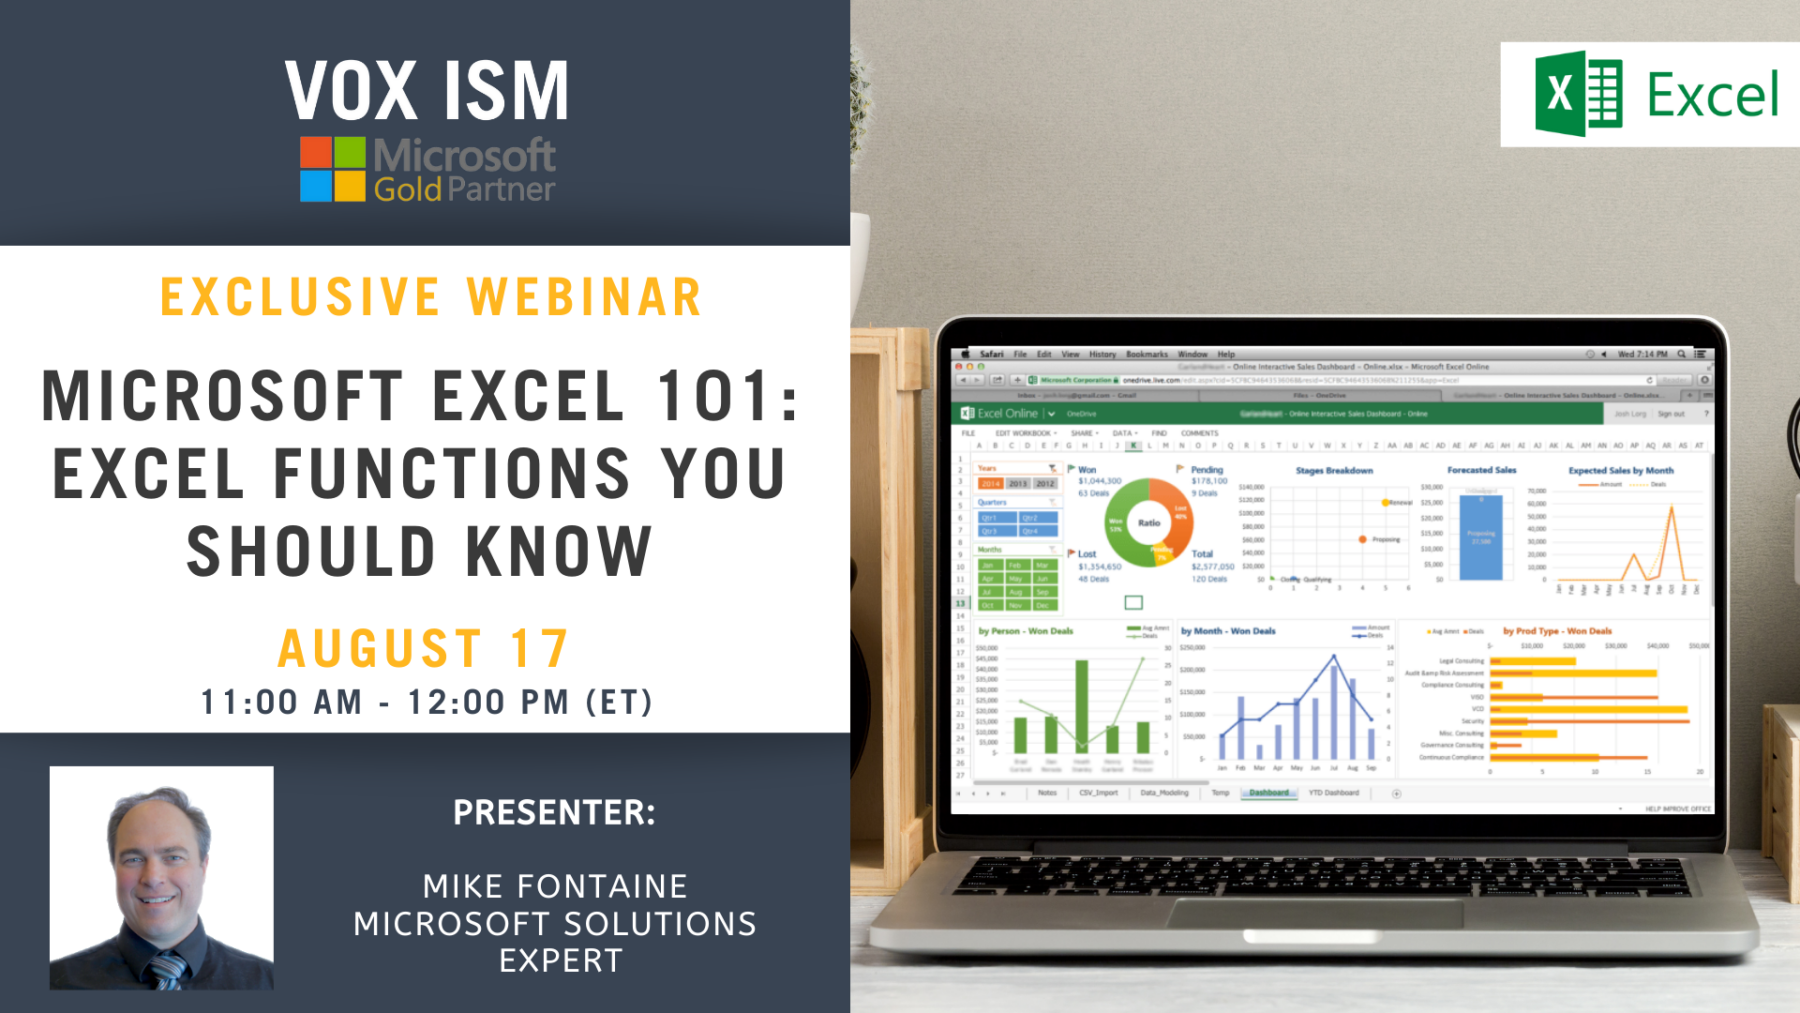 Microsoft Excel 101 - Excel Functions you should know - August 17 - Webinar